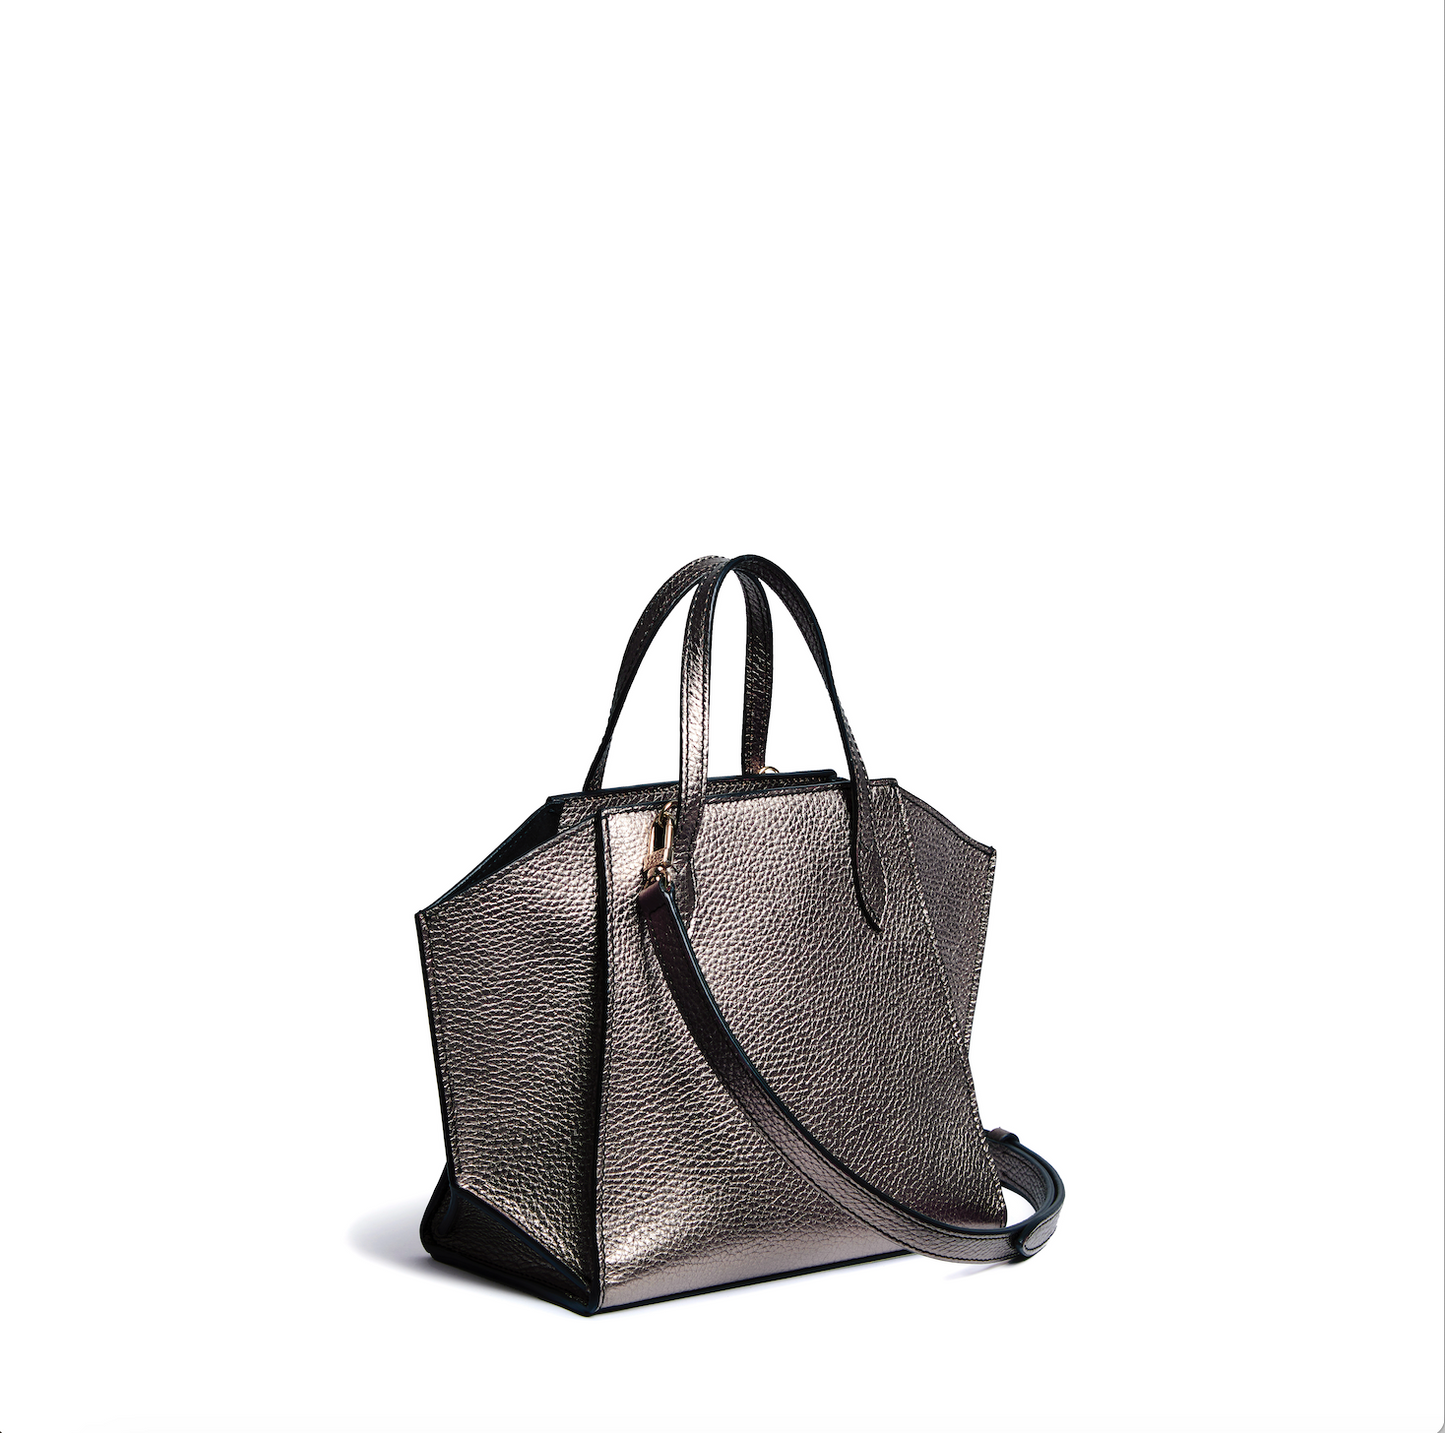 Gemma S, from Cristian Marcucci at Mazzi d Fiori, is a beautiful and versatile mini tote bag. Its refined and elegant design makes it a stylish accessory. The small size allows for easy portability, while the internal pocket and zip fasteners provide convenient storage options. Whether you prefer to carry it by hand or over the shoulder, Gemma offers flexibility in its use. The use of fine leather and soft microsuede interior showcases the bag's high-quality craftsmanship.